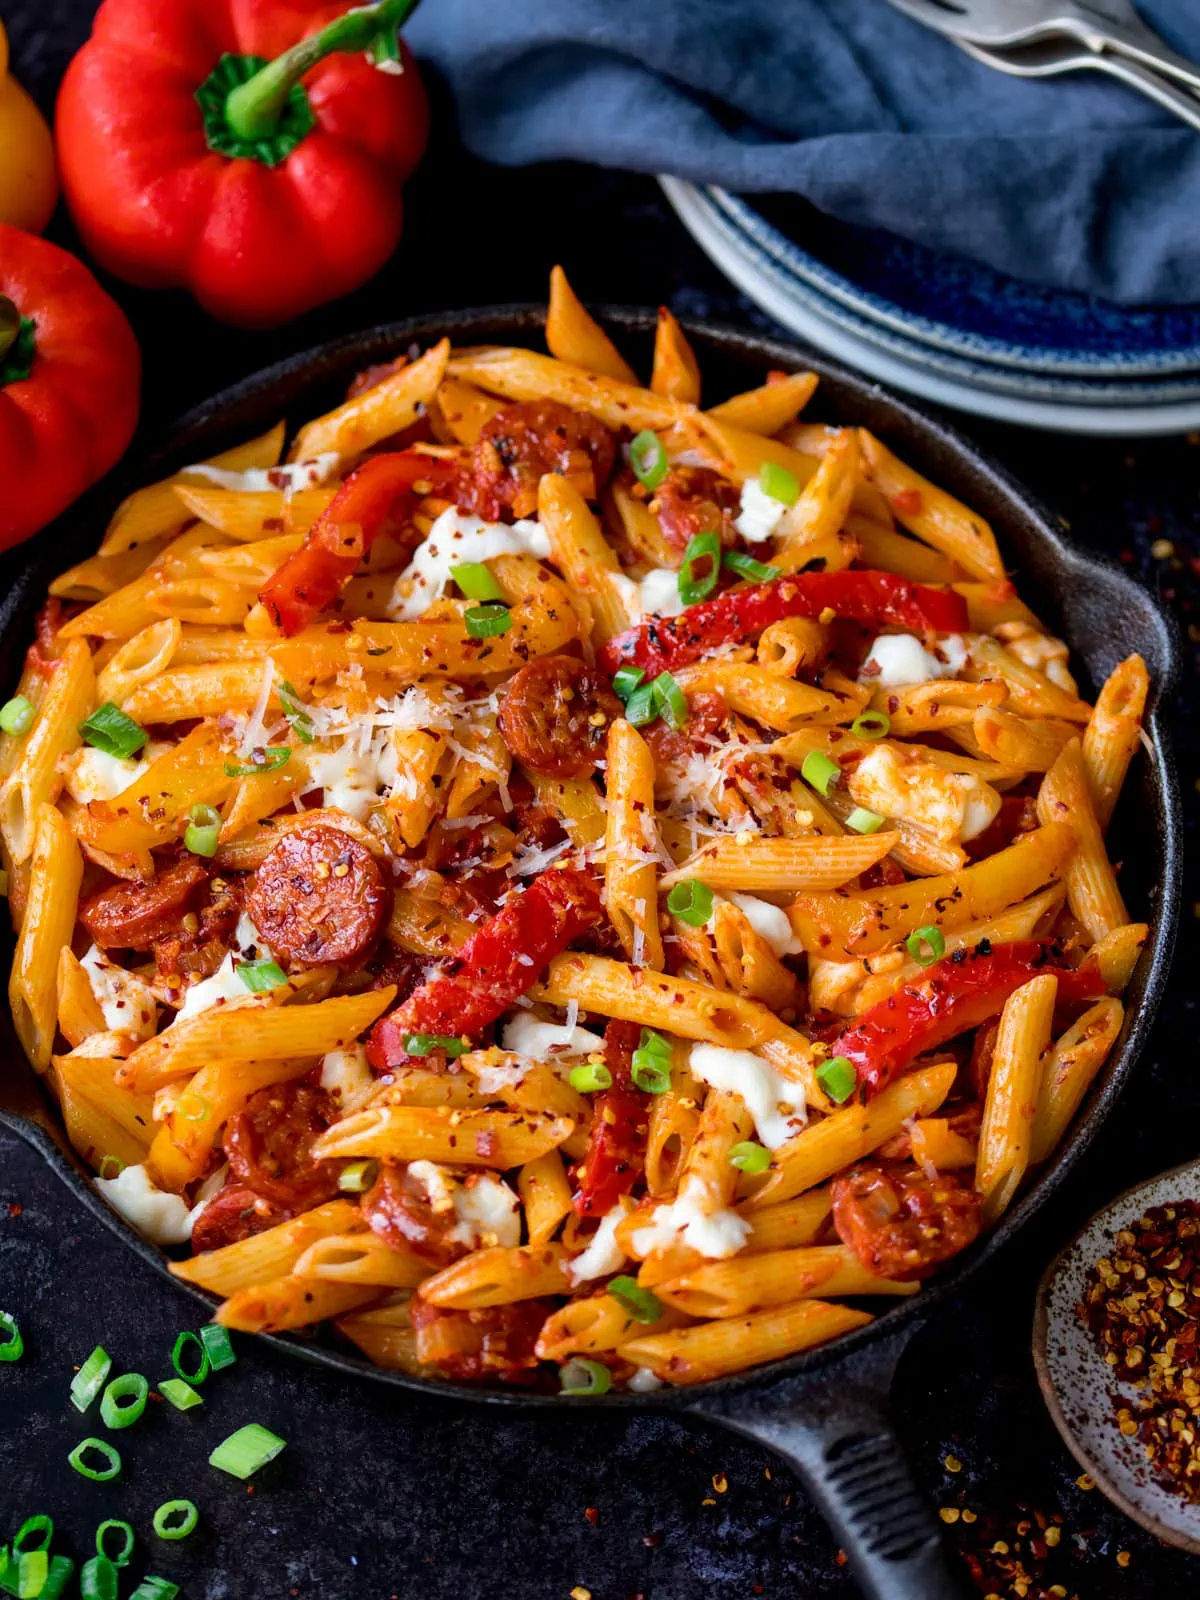 penne arrabbiata in a pan with mozzarella and chorizo. The pan is on a dark background and there are ingredients scattered around.